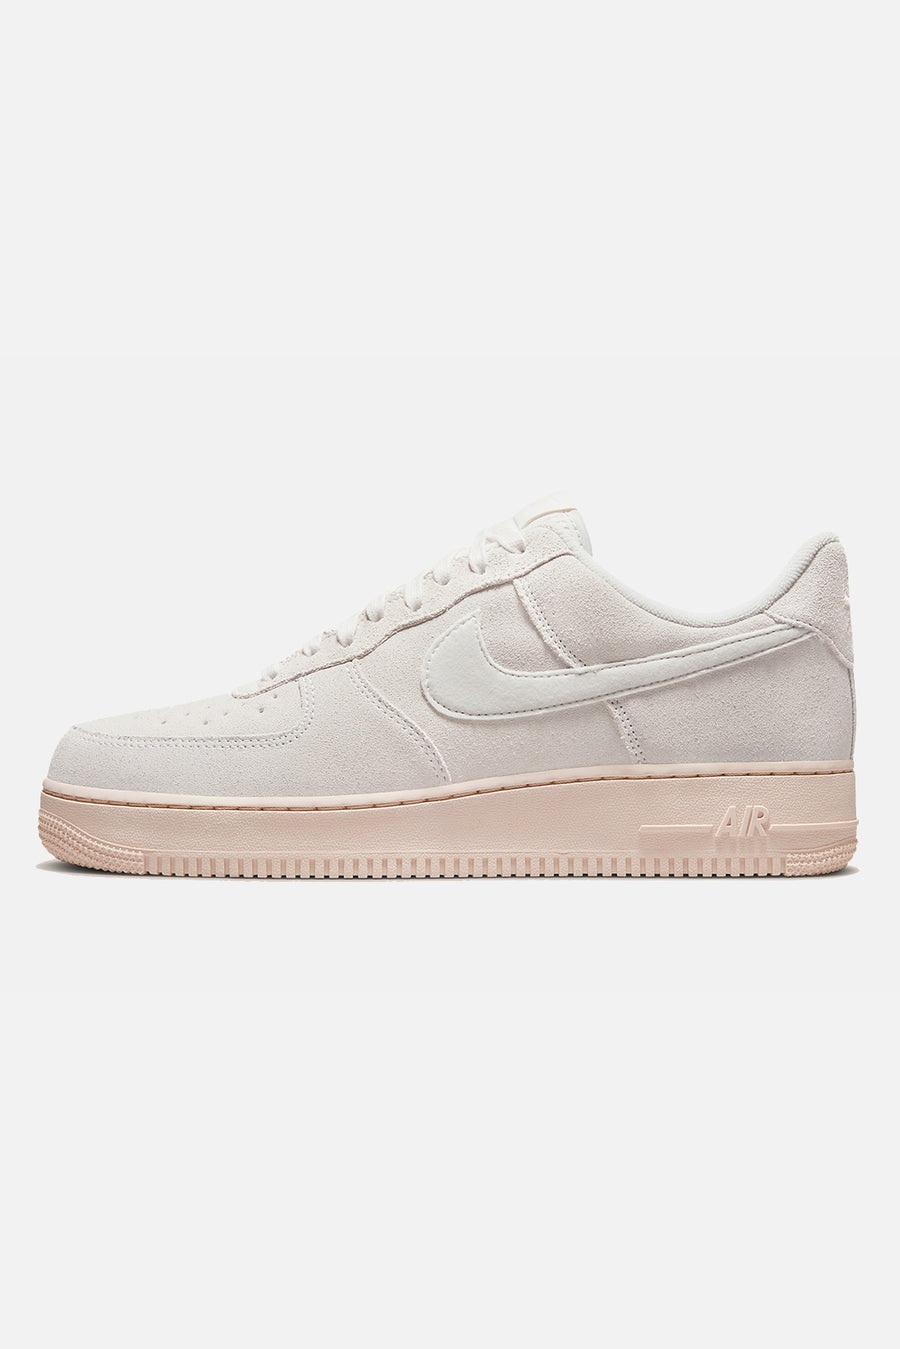 Nike Air Force 1 Summit White Suede - blueandcream